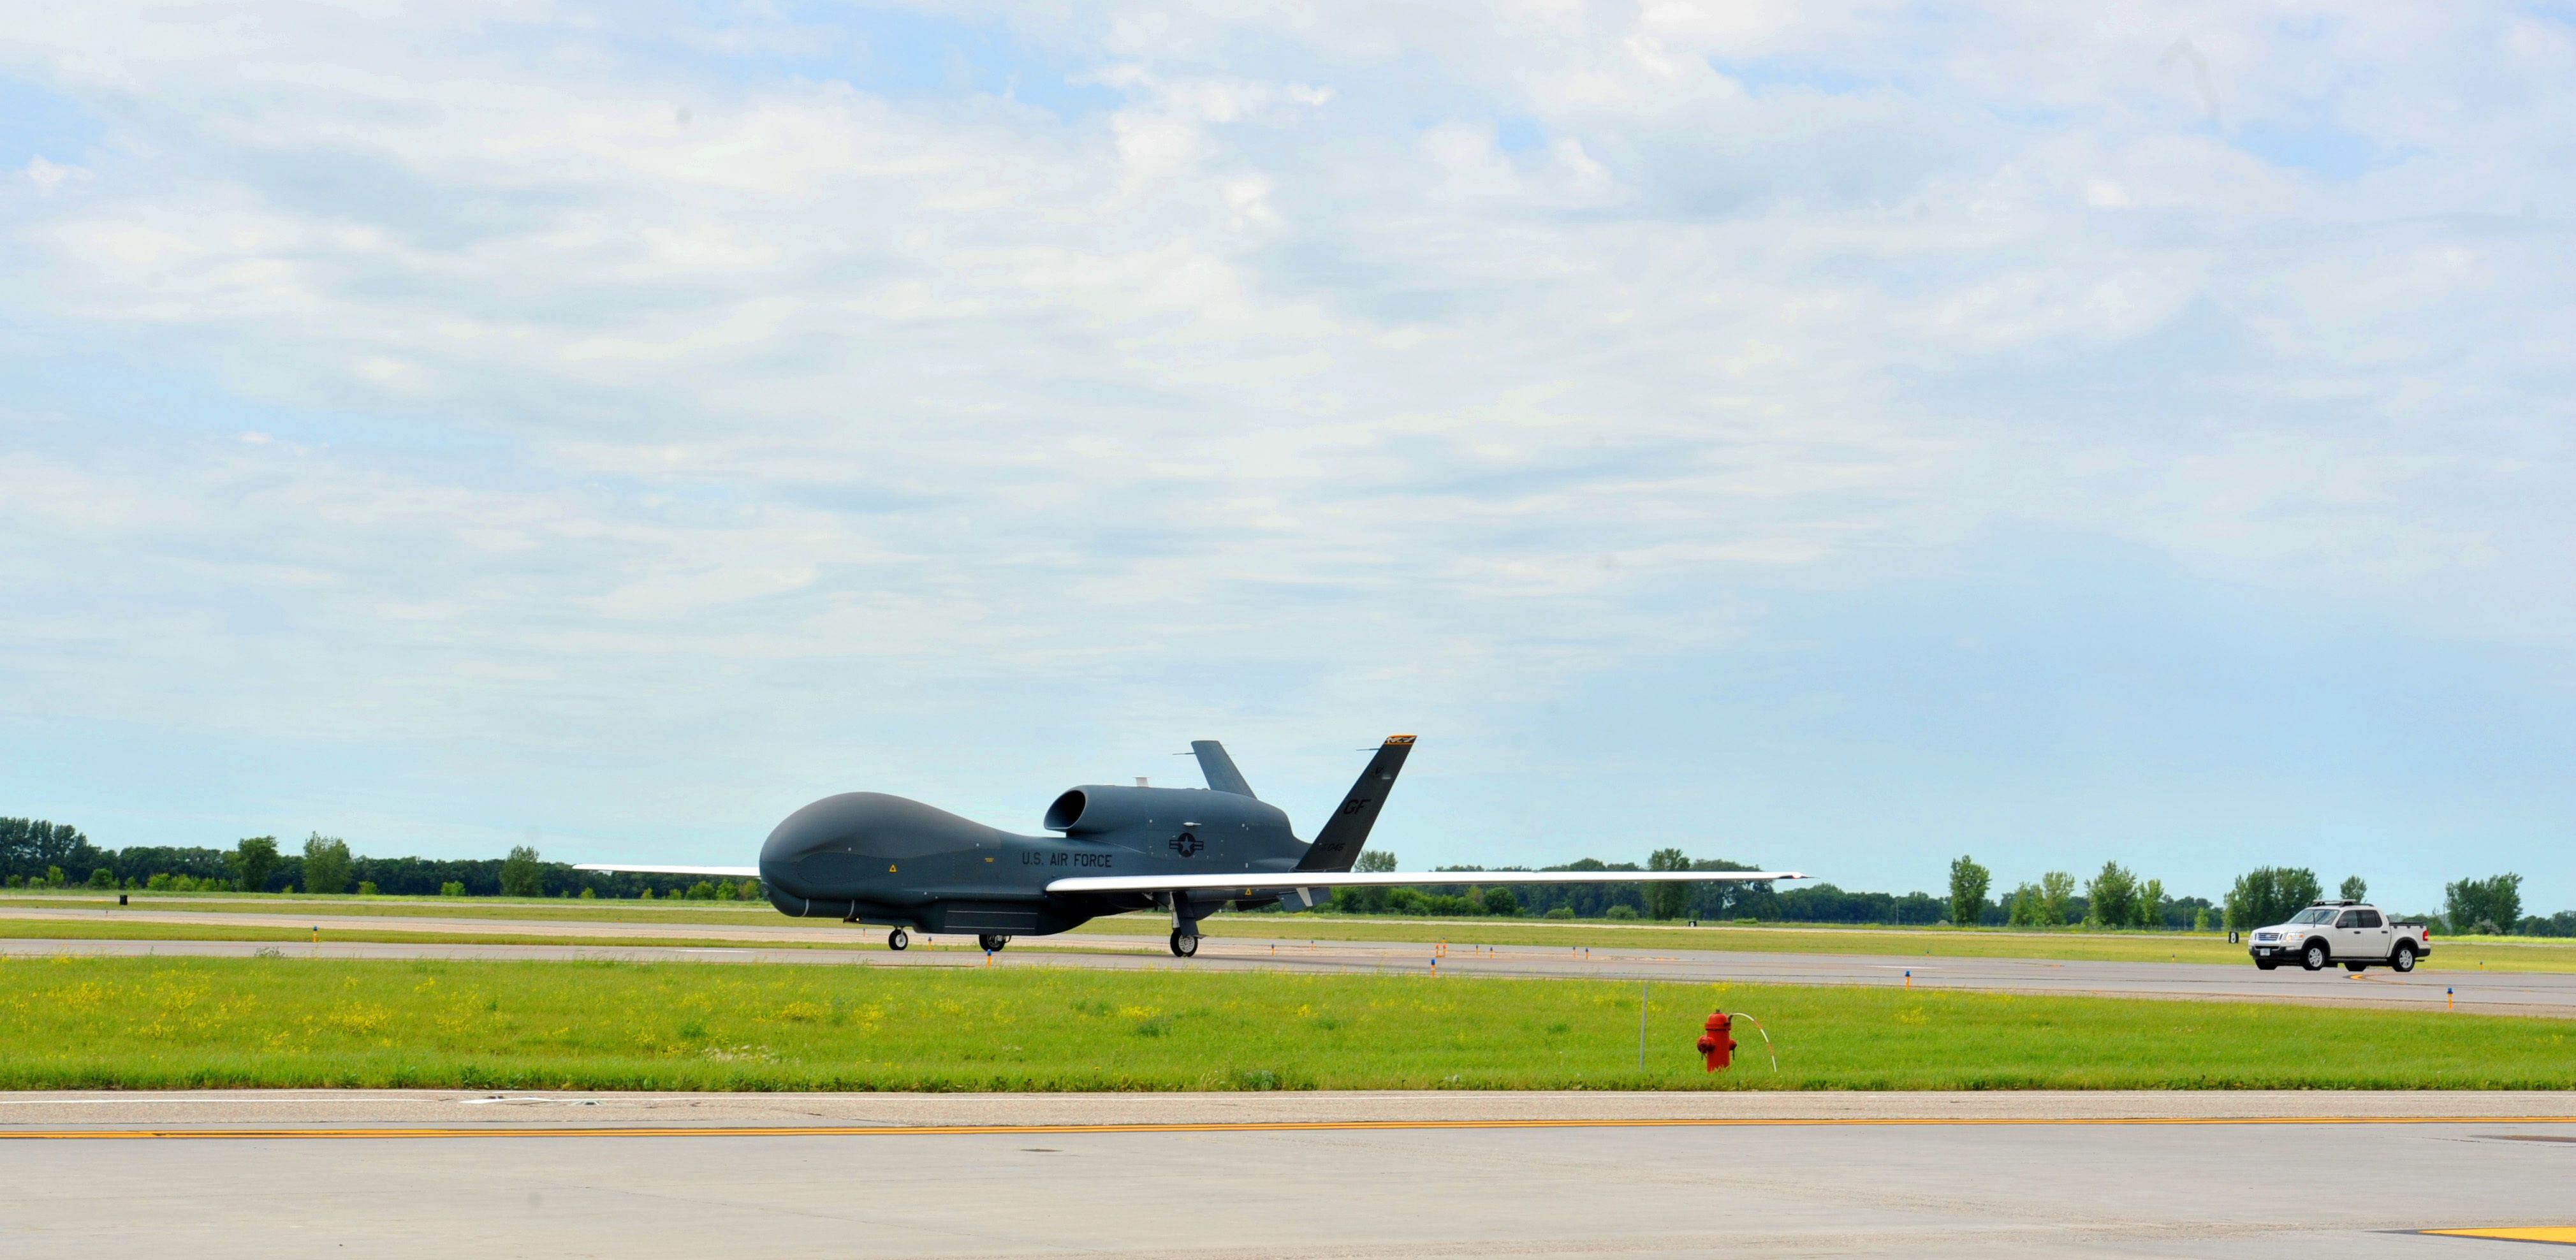 EXCLUSIVE: Air Force's RQ-4 Global Hawk drones headed for